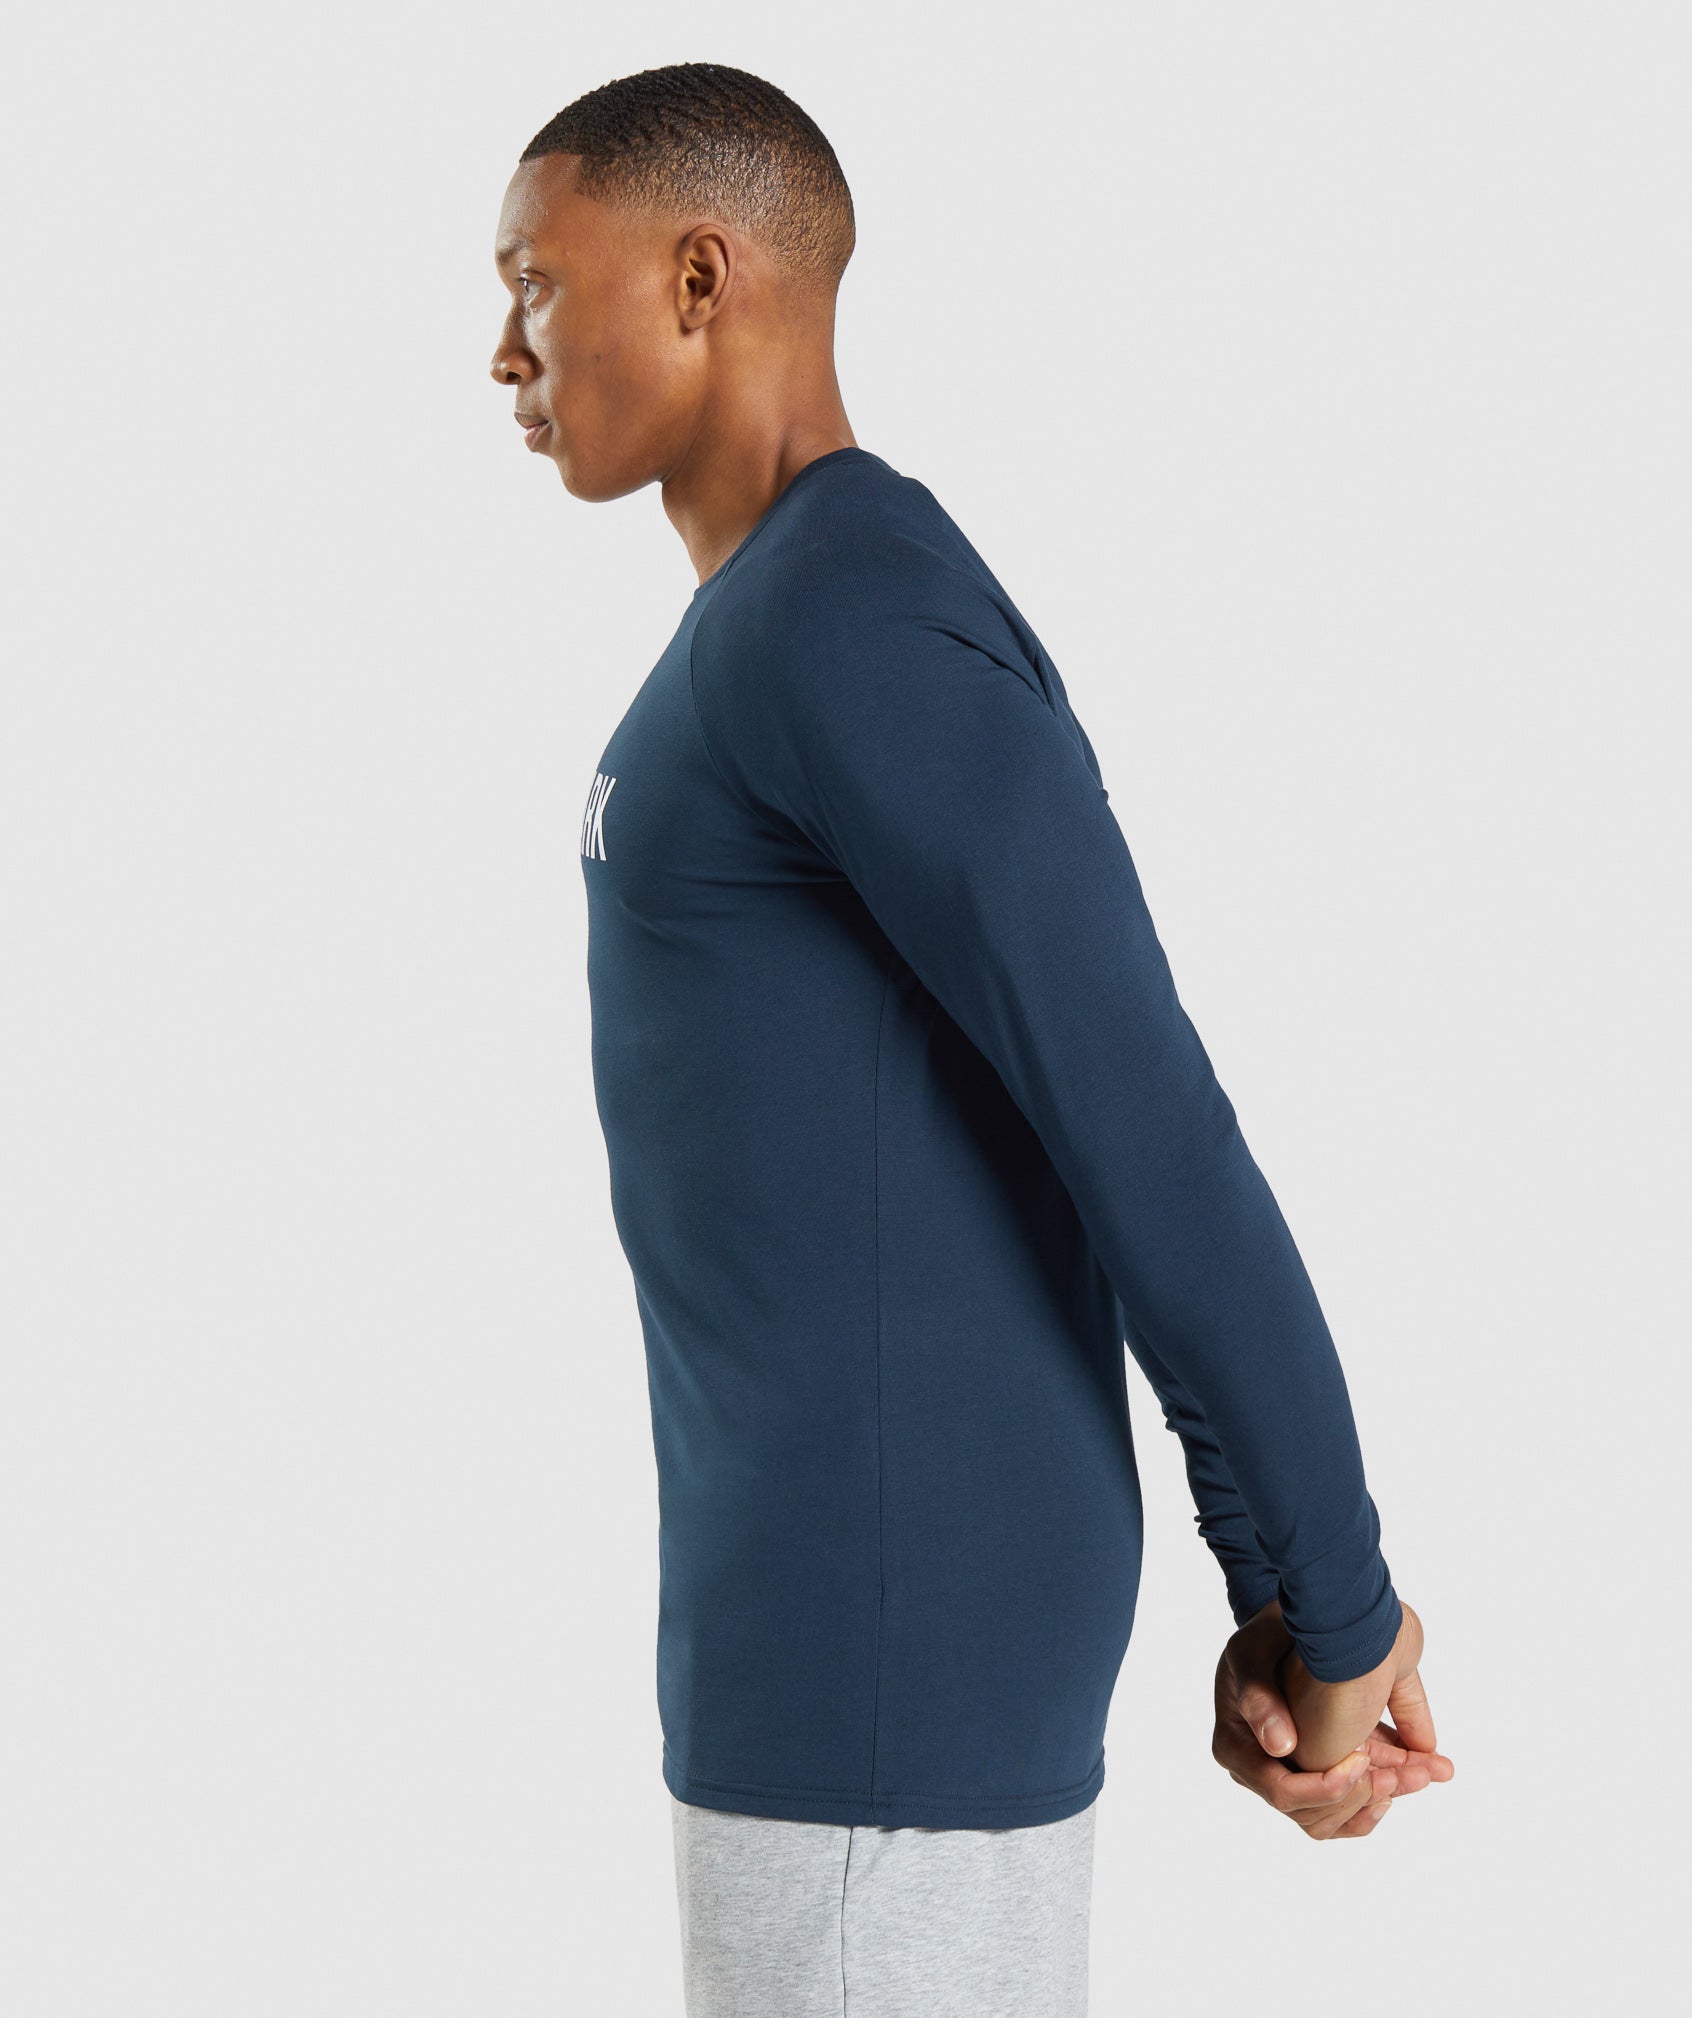 Apollo Long Sleeve T-Shirt in Navy - view 4